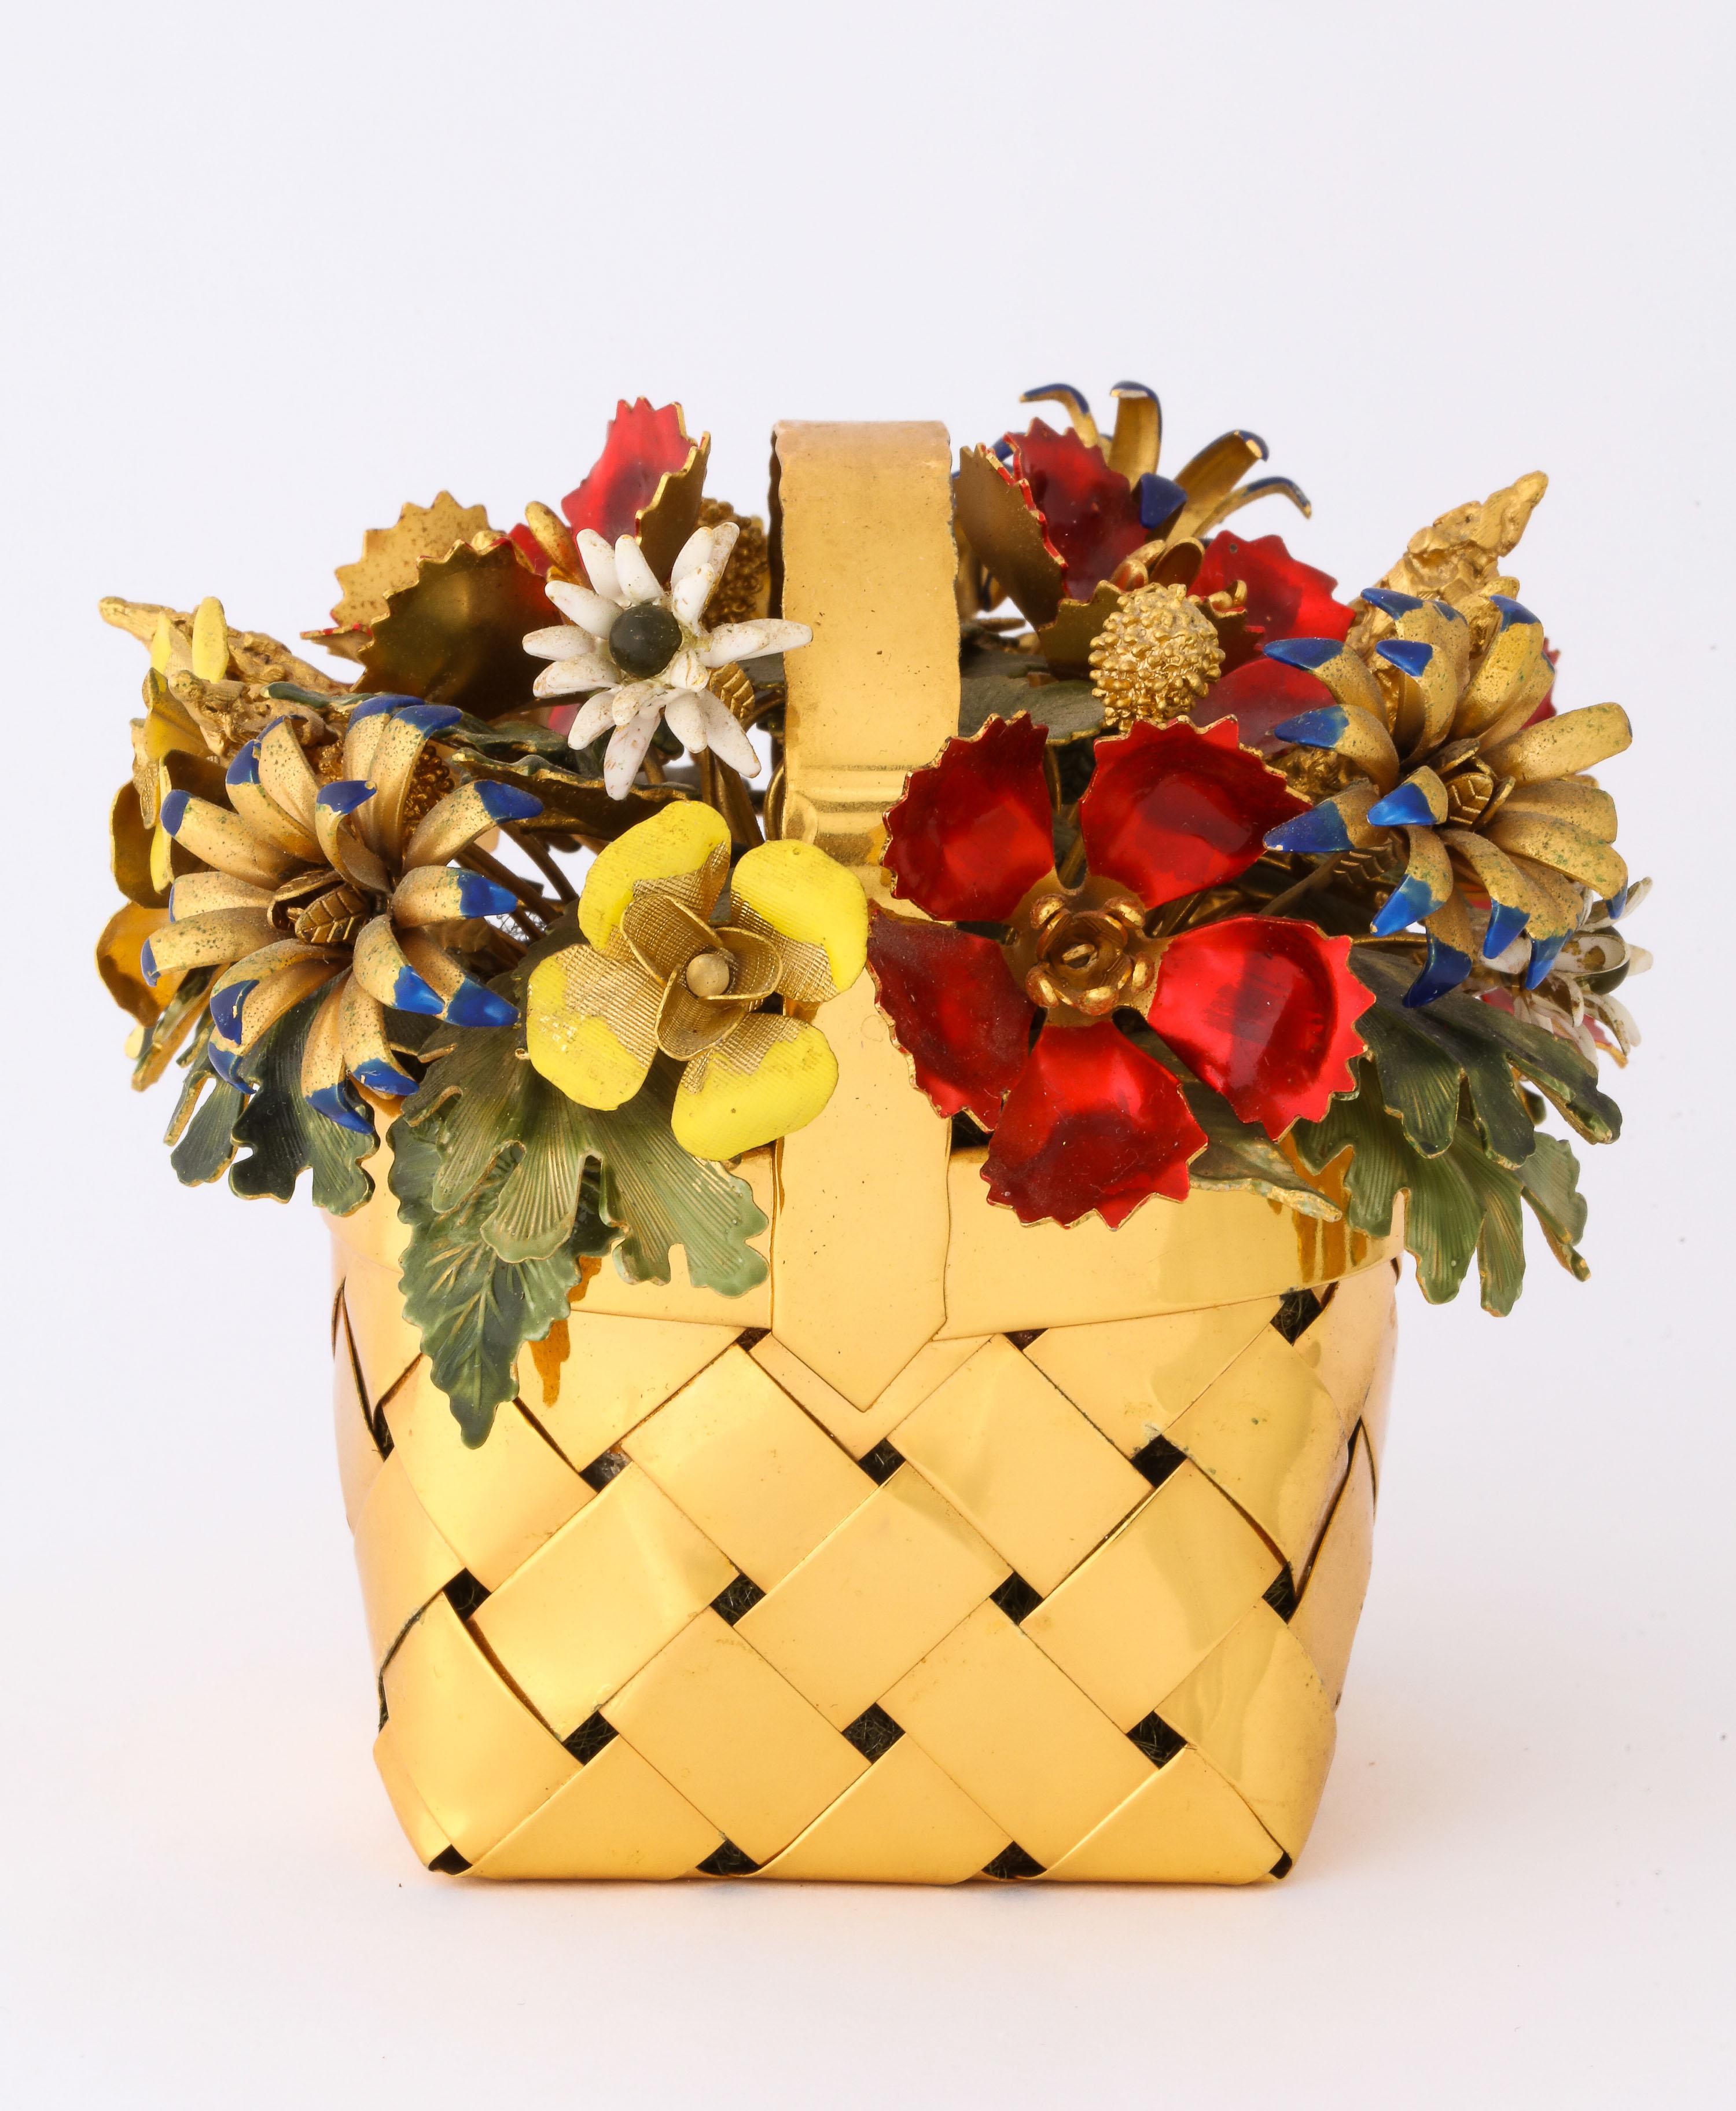 A silver gilt and enamel table ornament basket by Cartier, circa 1950.

Designed by Jane Hutcheson for Cartier.

Modelled as a basket of flowers, the woven silver-gilt punnet filled with a spray of various enamelled flowers, buds and leaves.